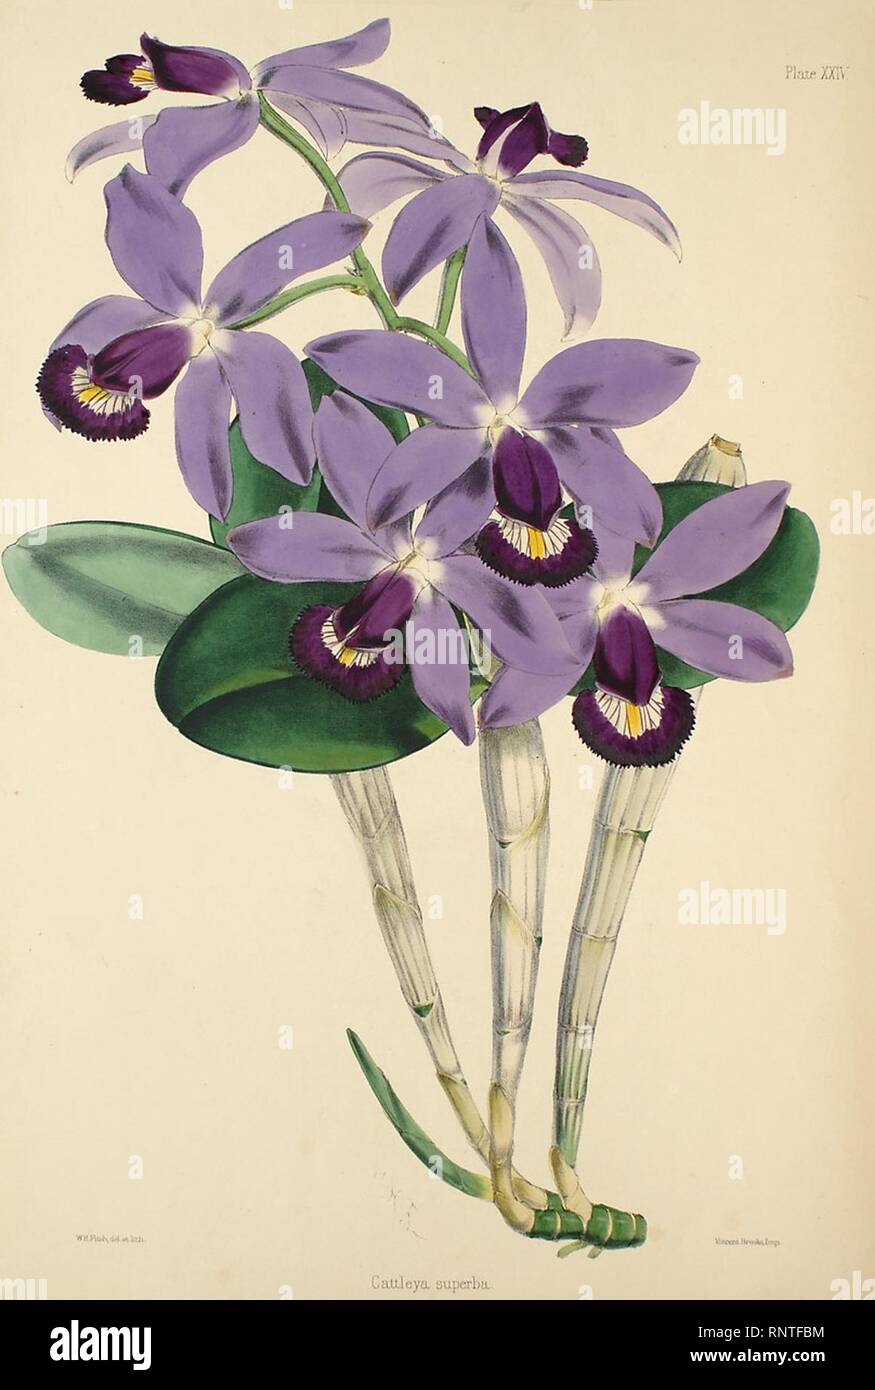 Cattleya violacea (as C. superba) - Warner, Williams - Select orch. plants 1, pl. 24 (1862-1865). Stock Photo